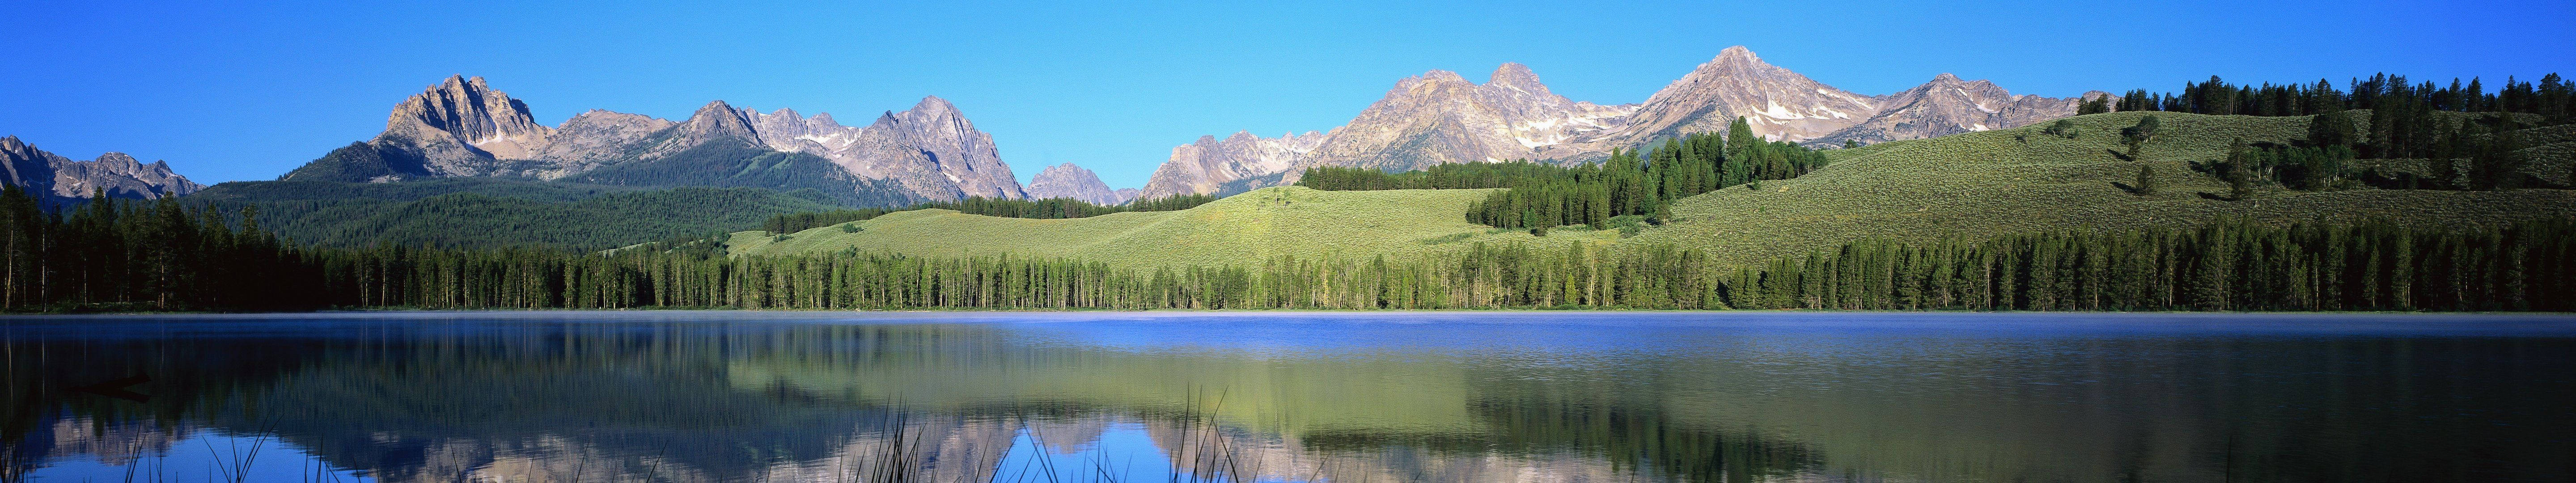 4k Dual Monitor Lake With View Of Mountains